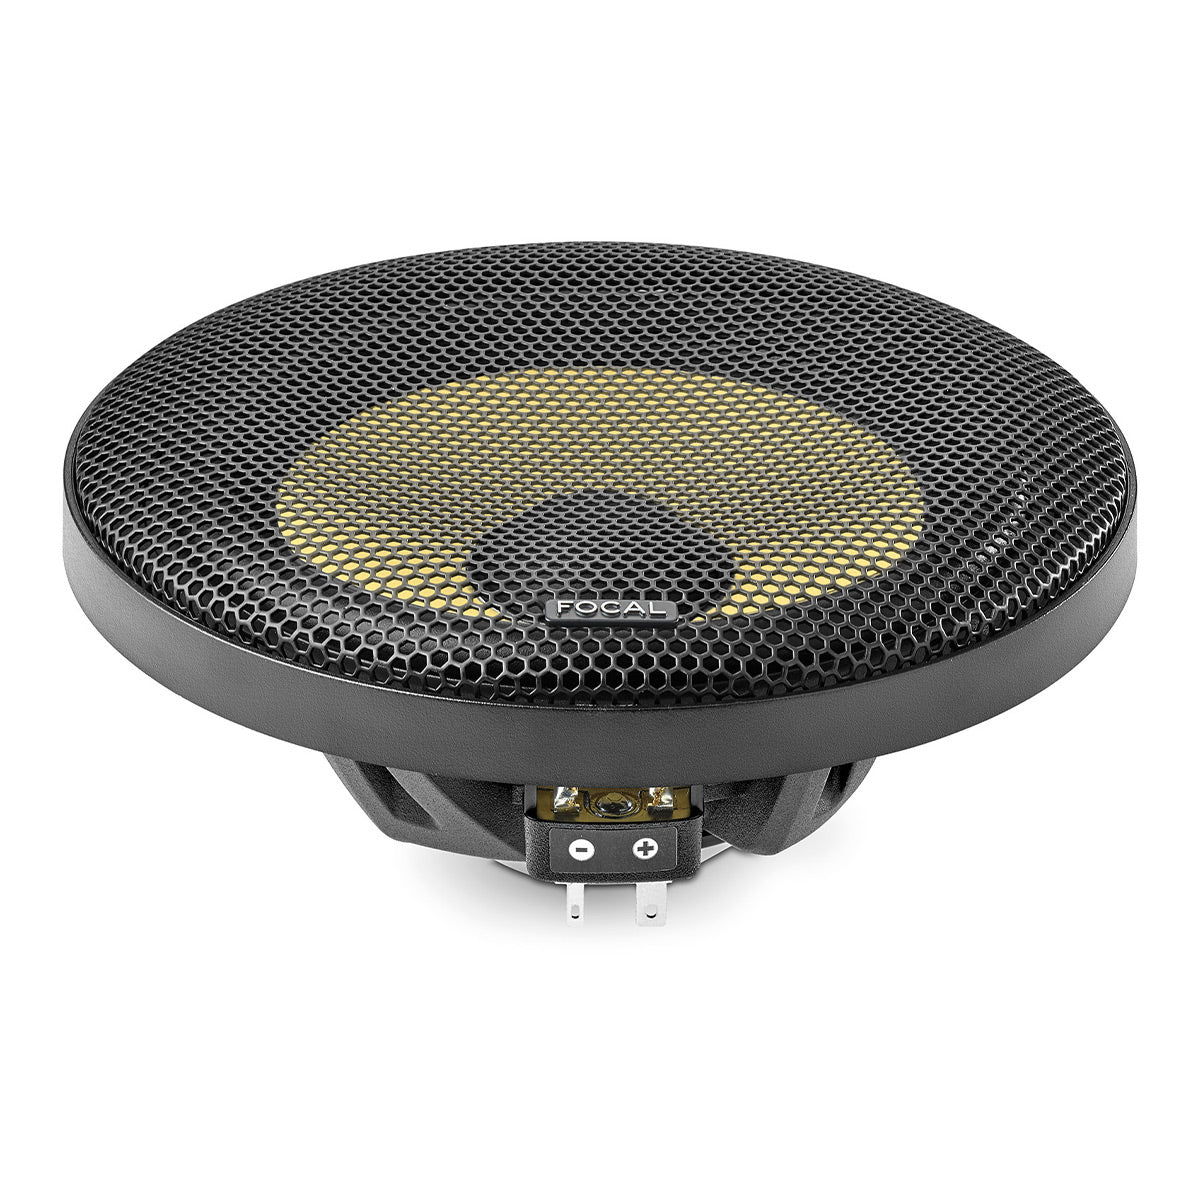 Focal ES 165 K2S 6.5" K2 EVO Shallow 2-Way Component Speaker Kit with TKME Tweeters & Compact Crossovers